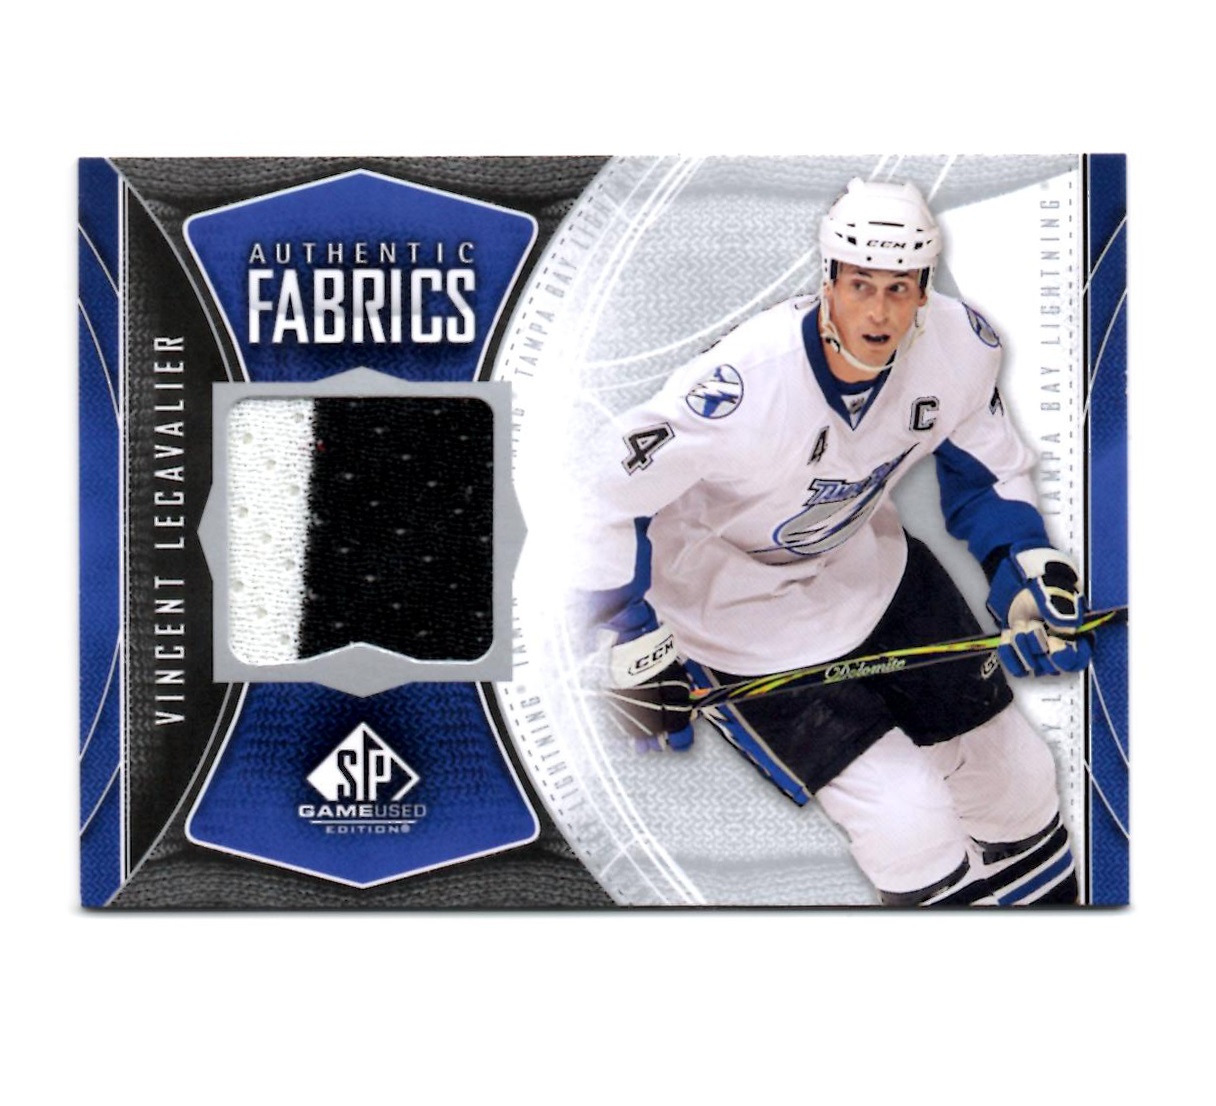 2009-10 SP Game Used Authentic Fabrics #AFVL Vincent Lecavalier (40-X135-LIGHTNING)